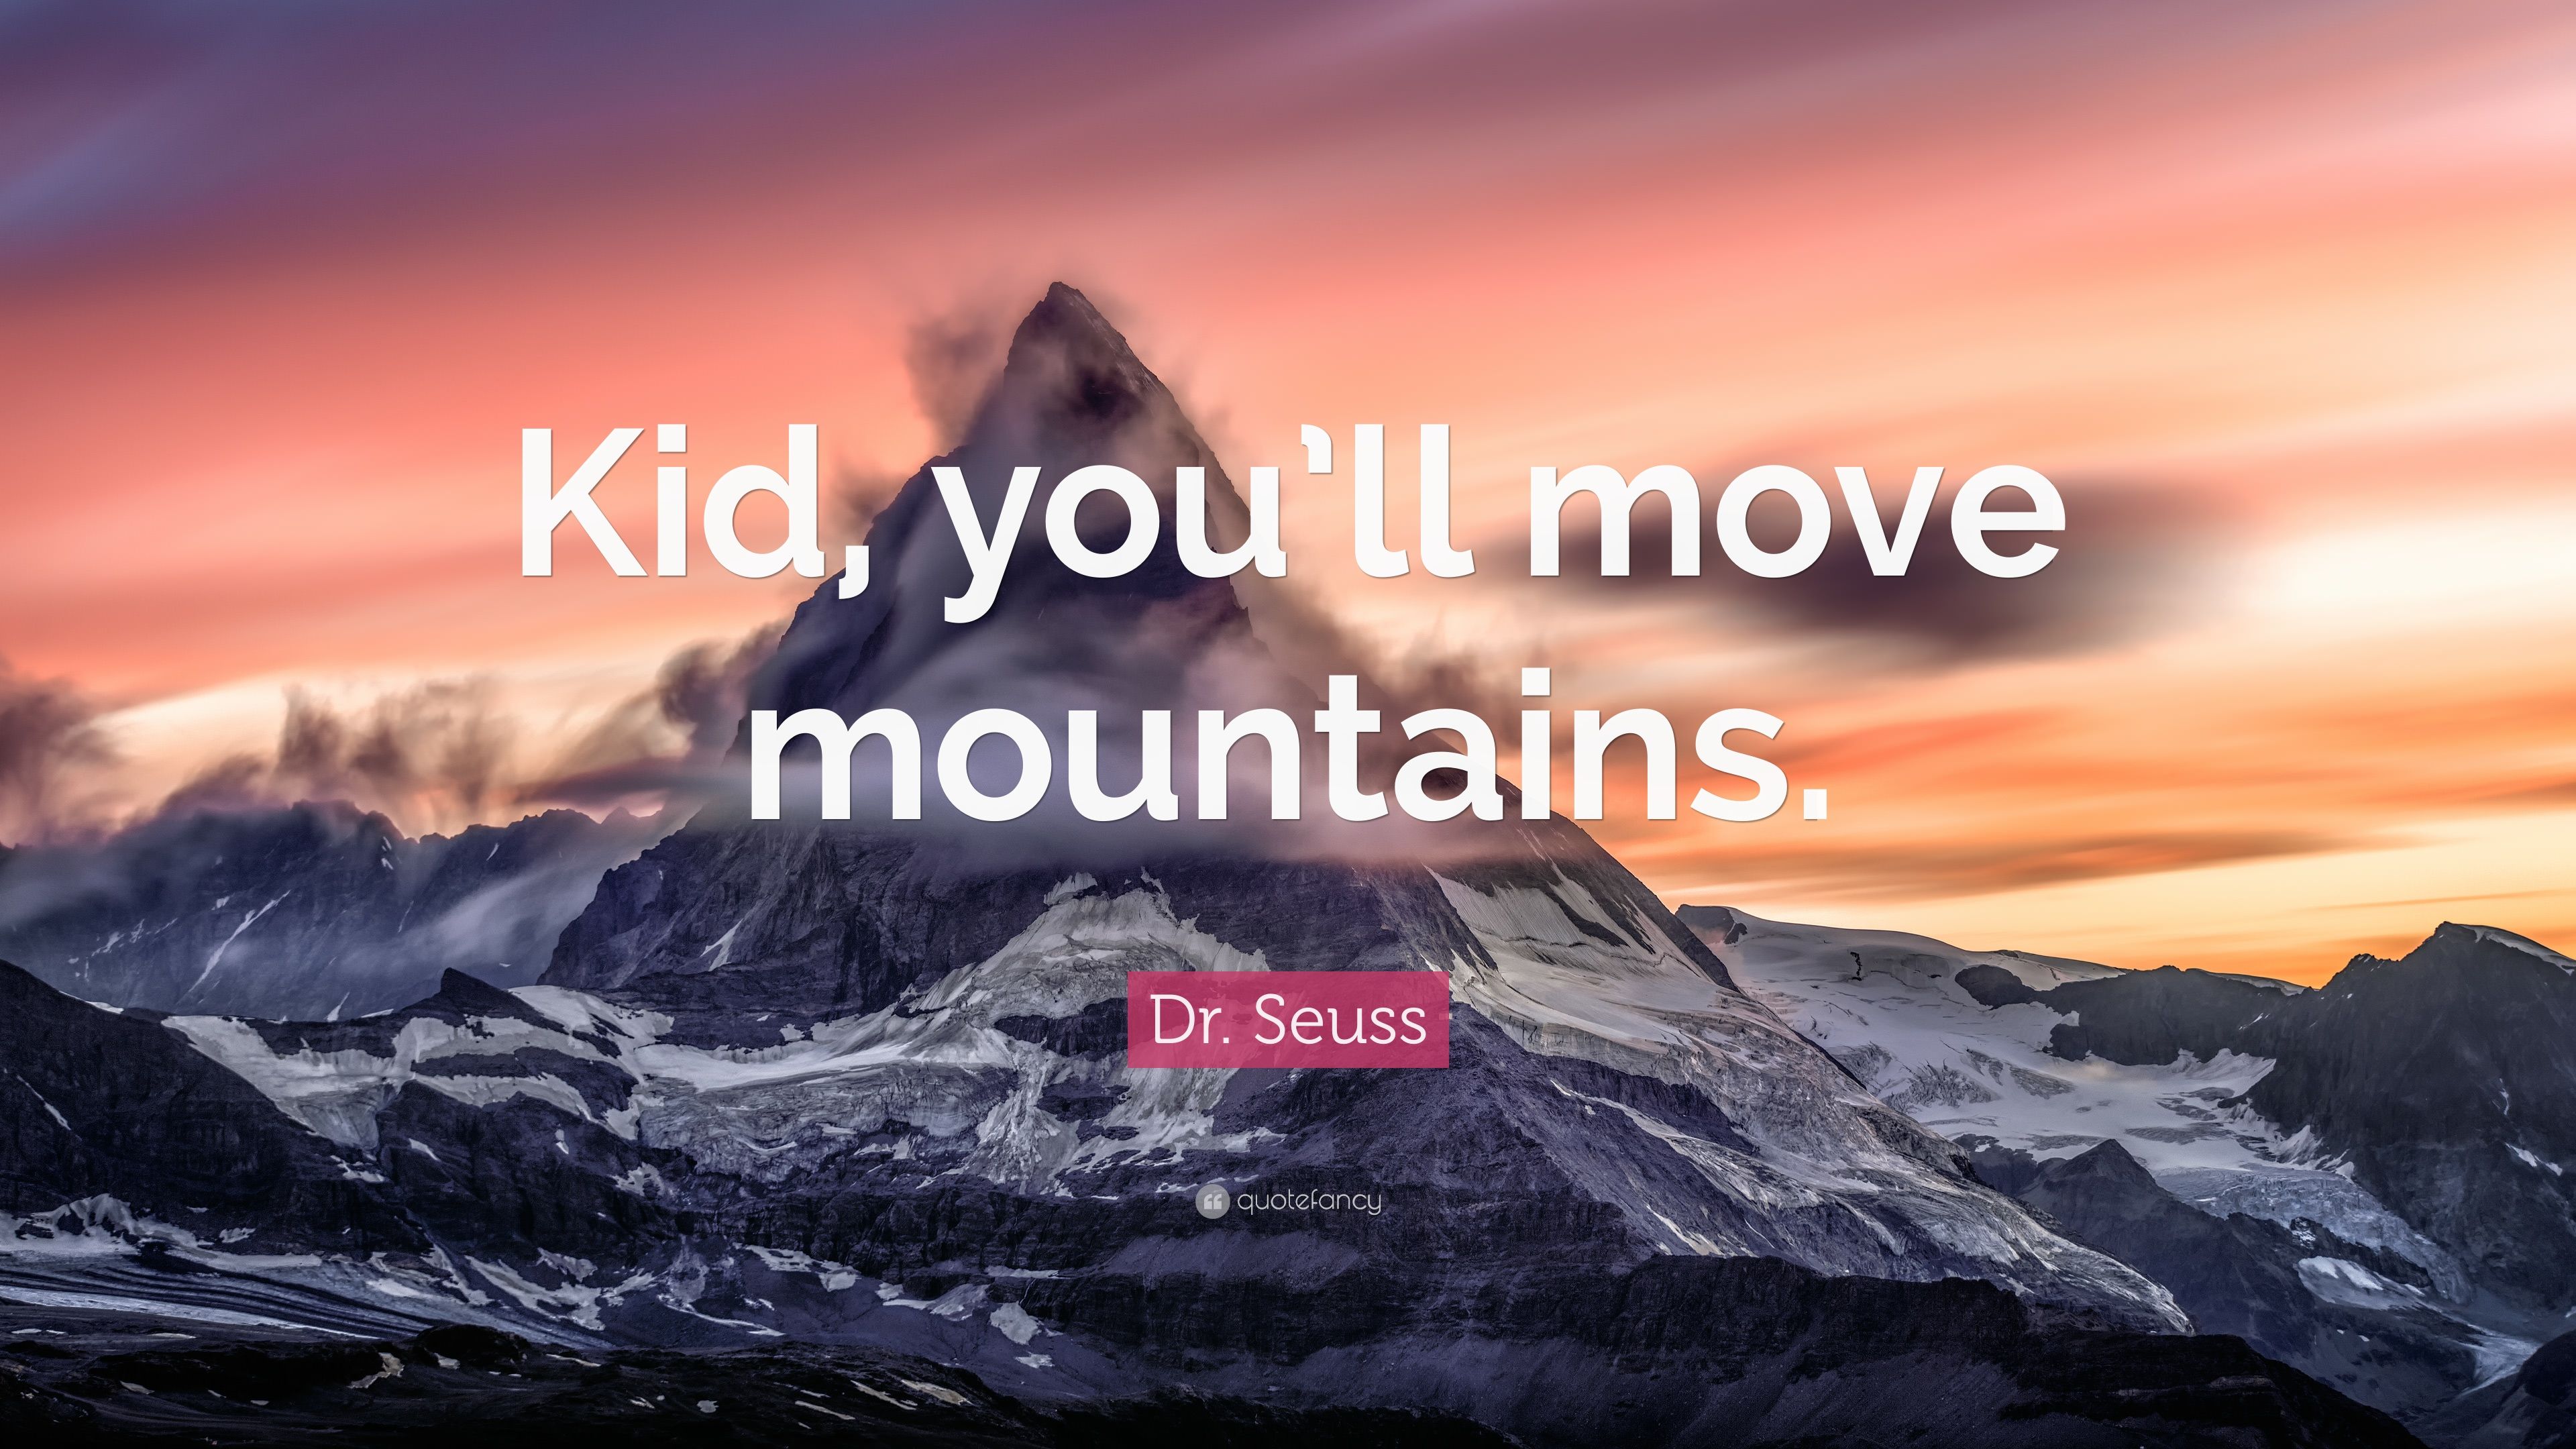 Dr. Seuss Quote: “Kid, you'll move mountains.” 12 wallpaper